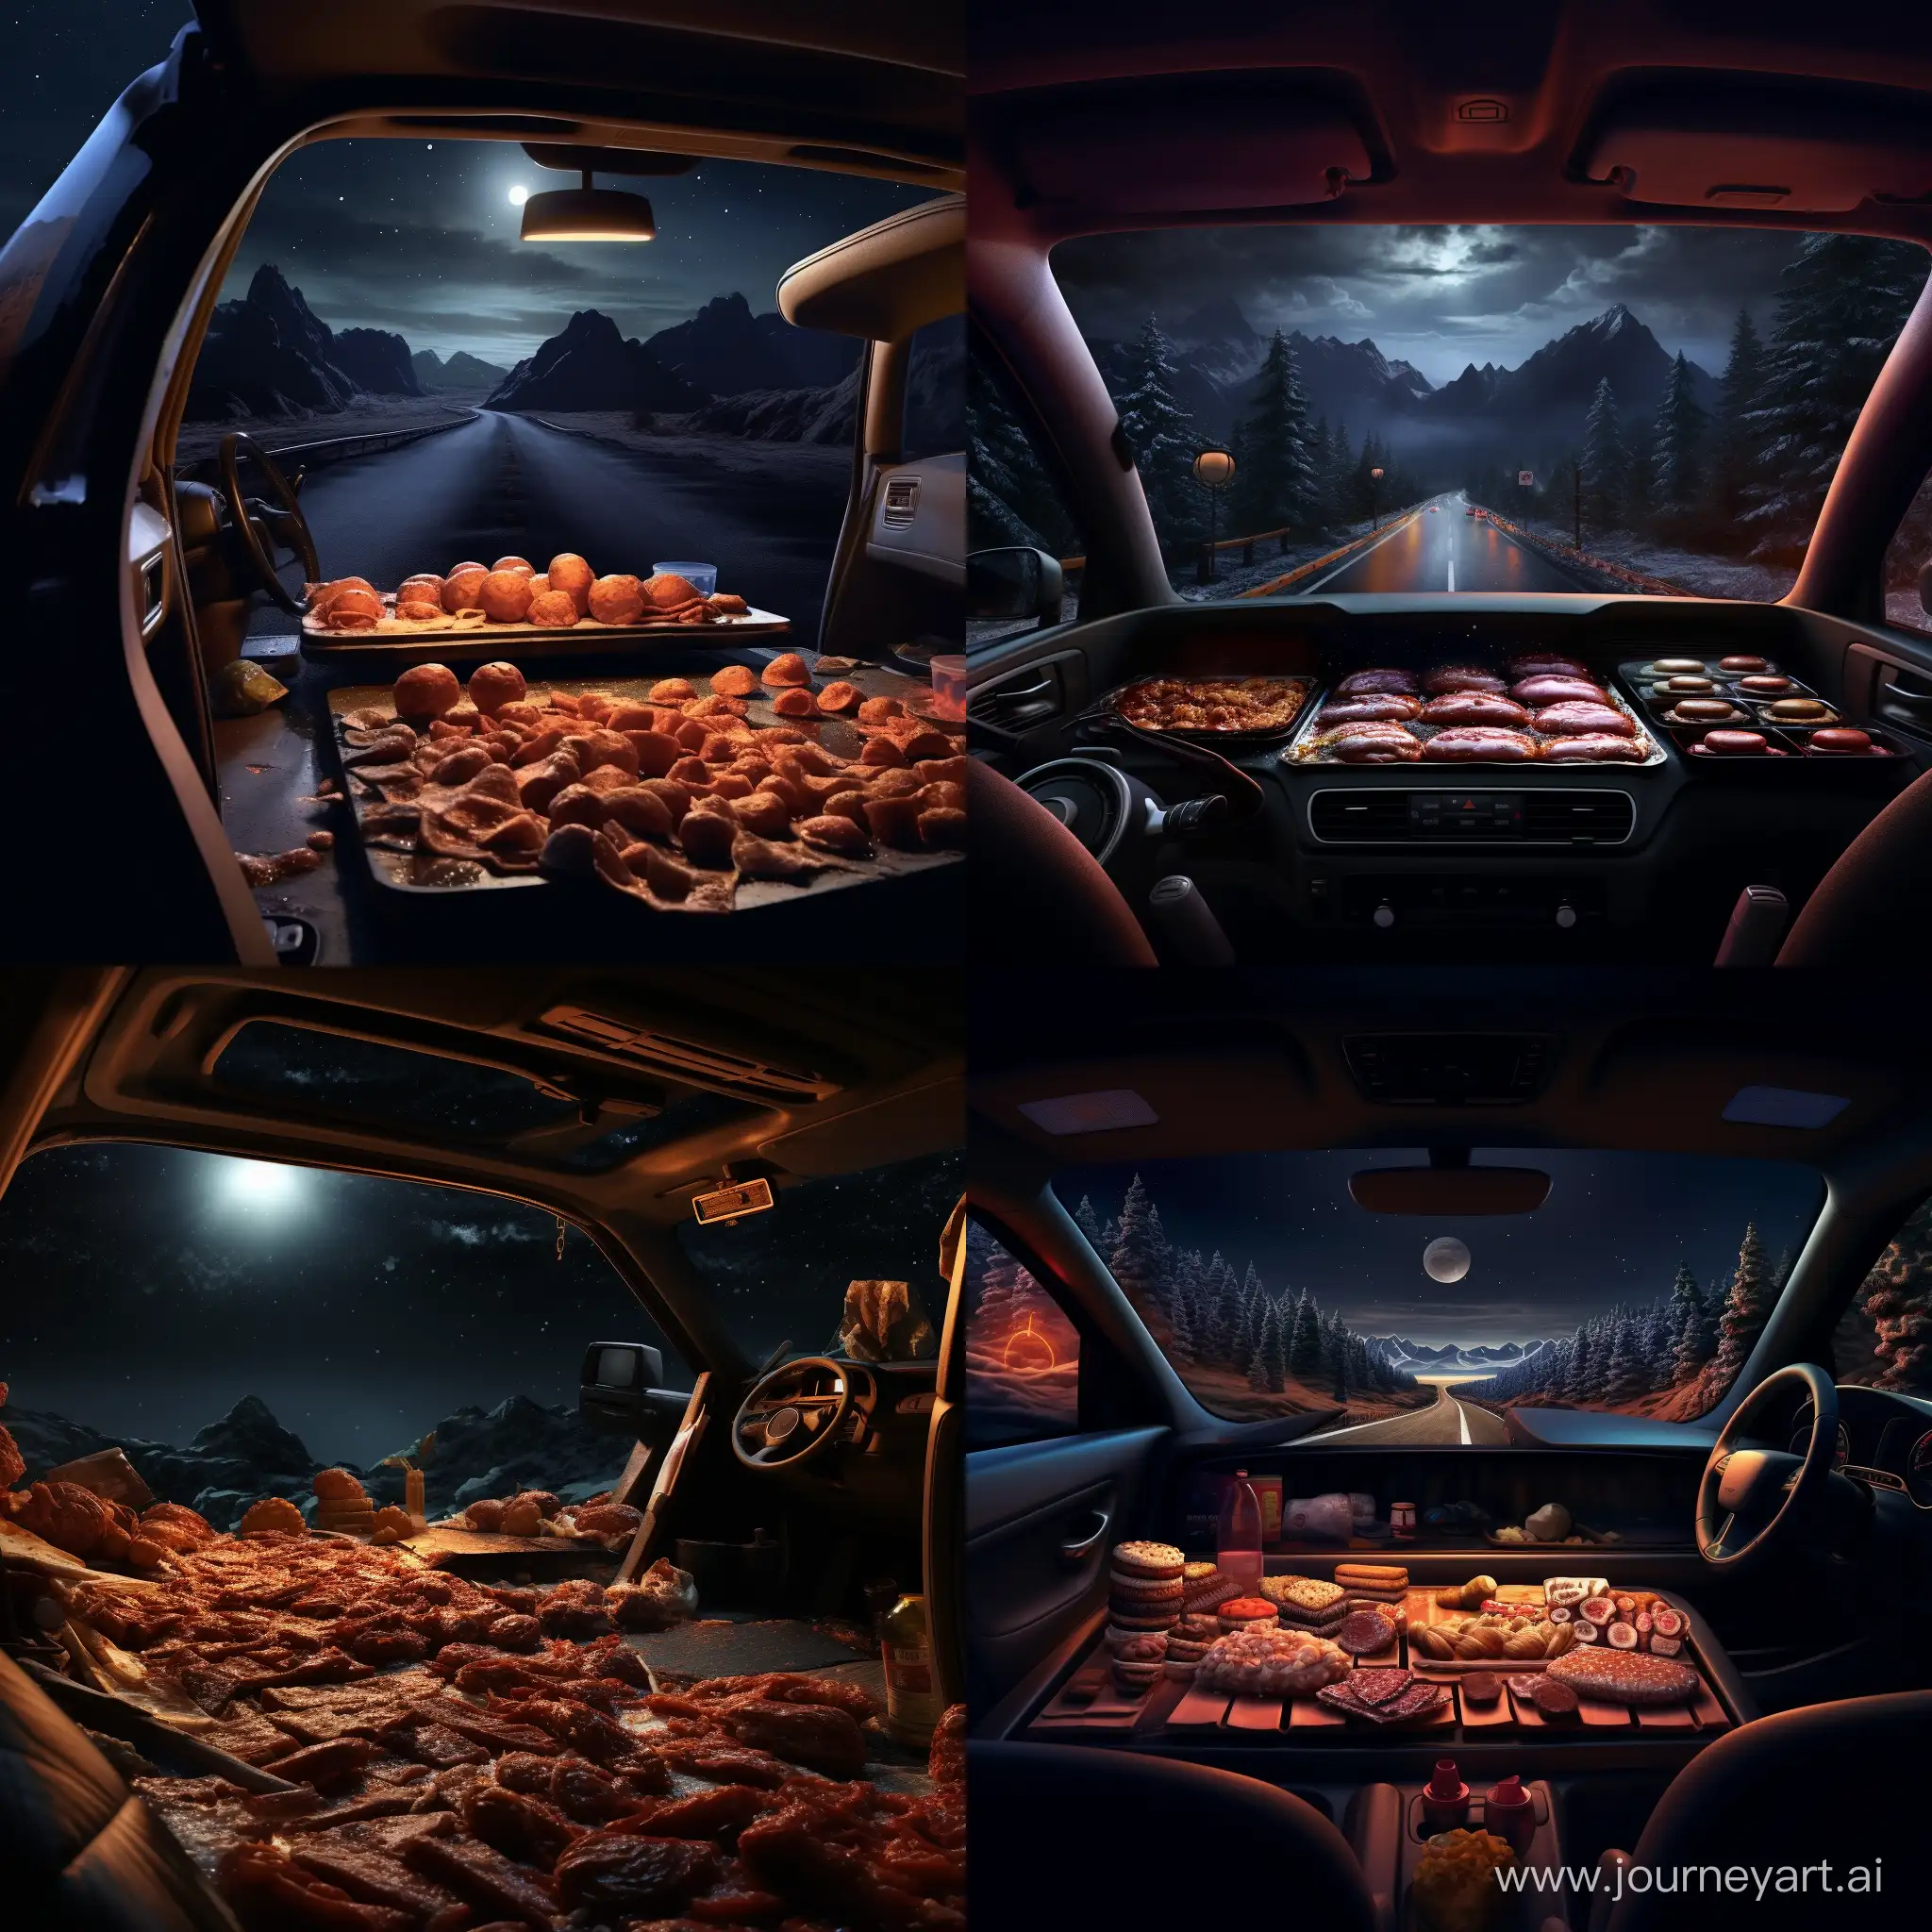 on a highway at night, illuminated only by the lights of the cars, in the right lane you can see a mound of sausage and other barbeque meat. all in a point of view from inside a car